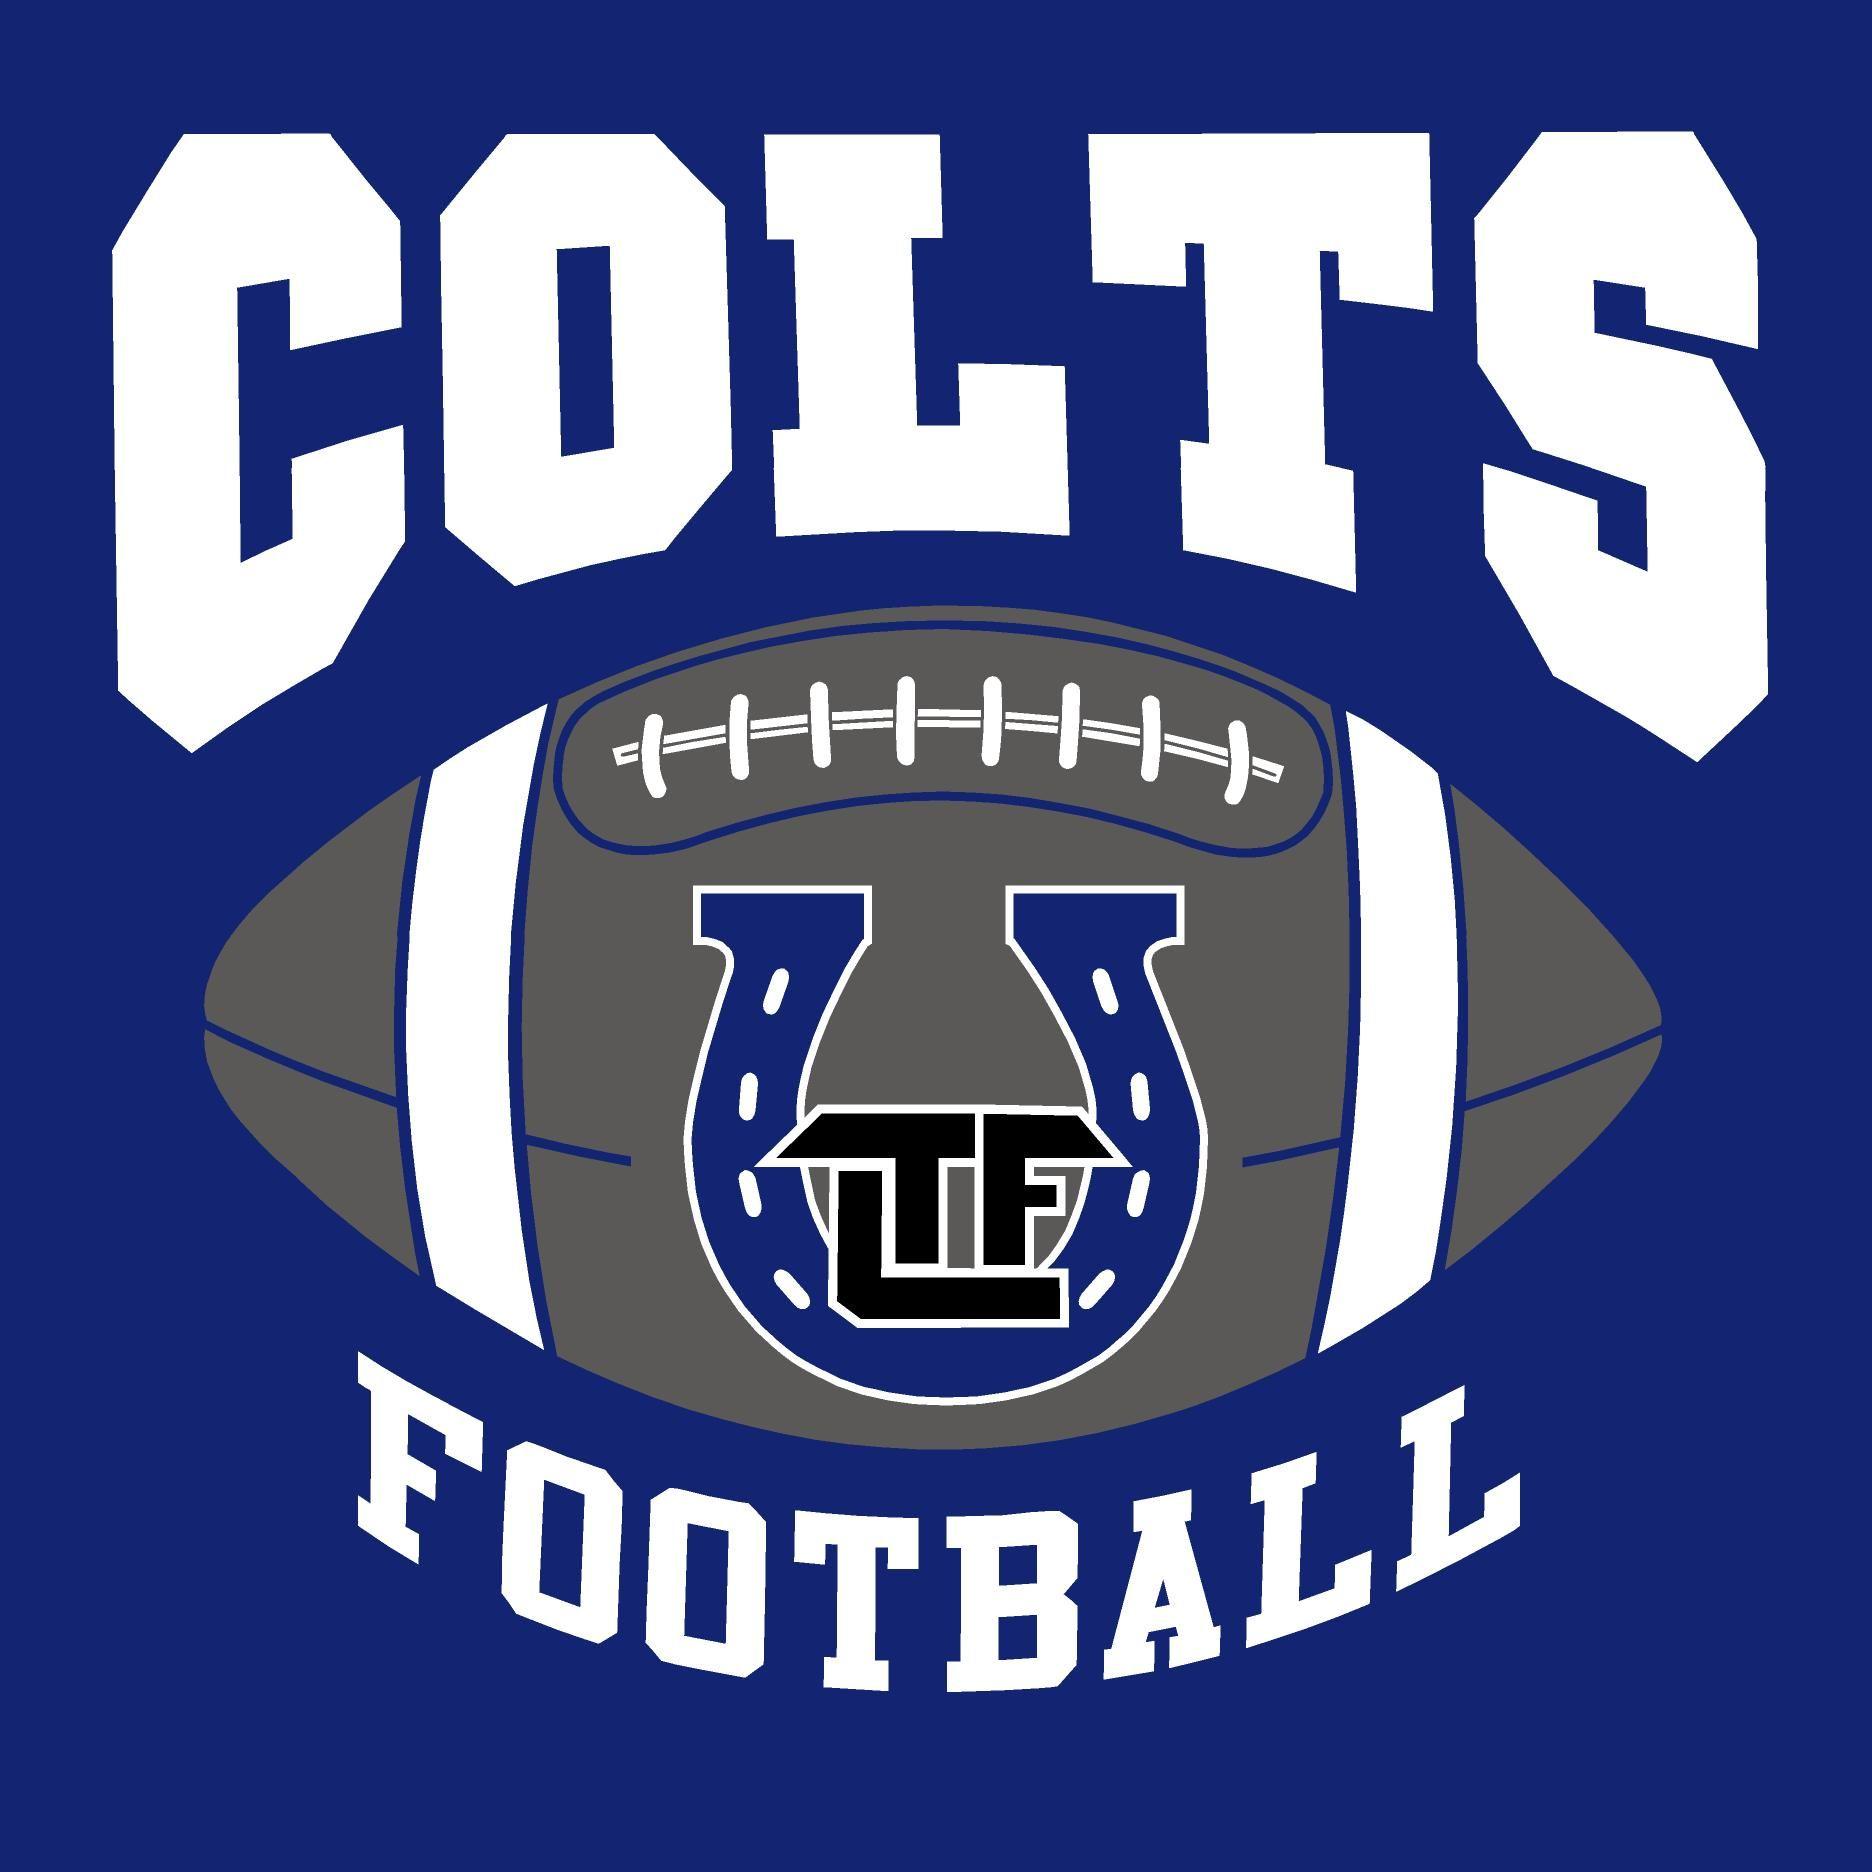 Colts Football Logo - images of the colts football team logo | Colts | SPORTS | Pinterest ...